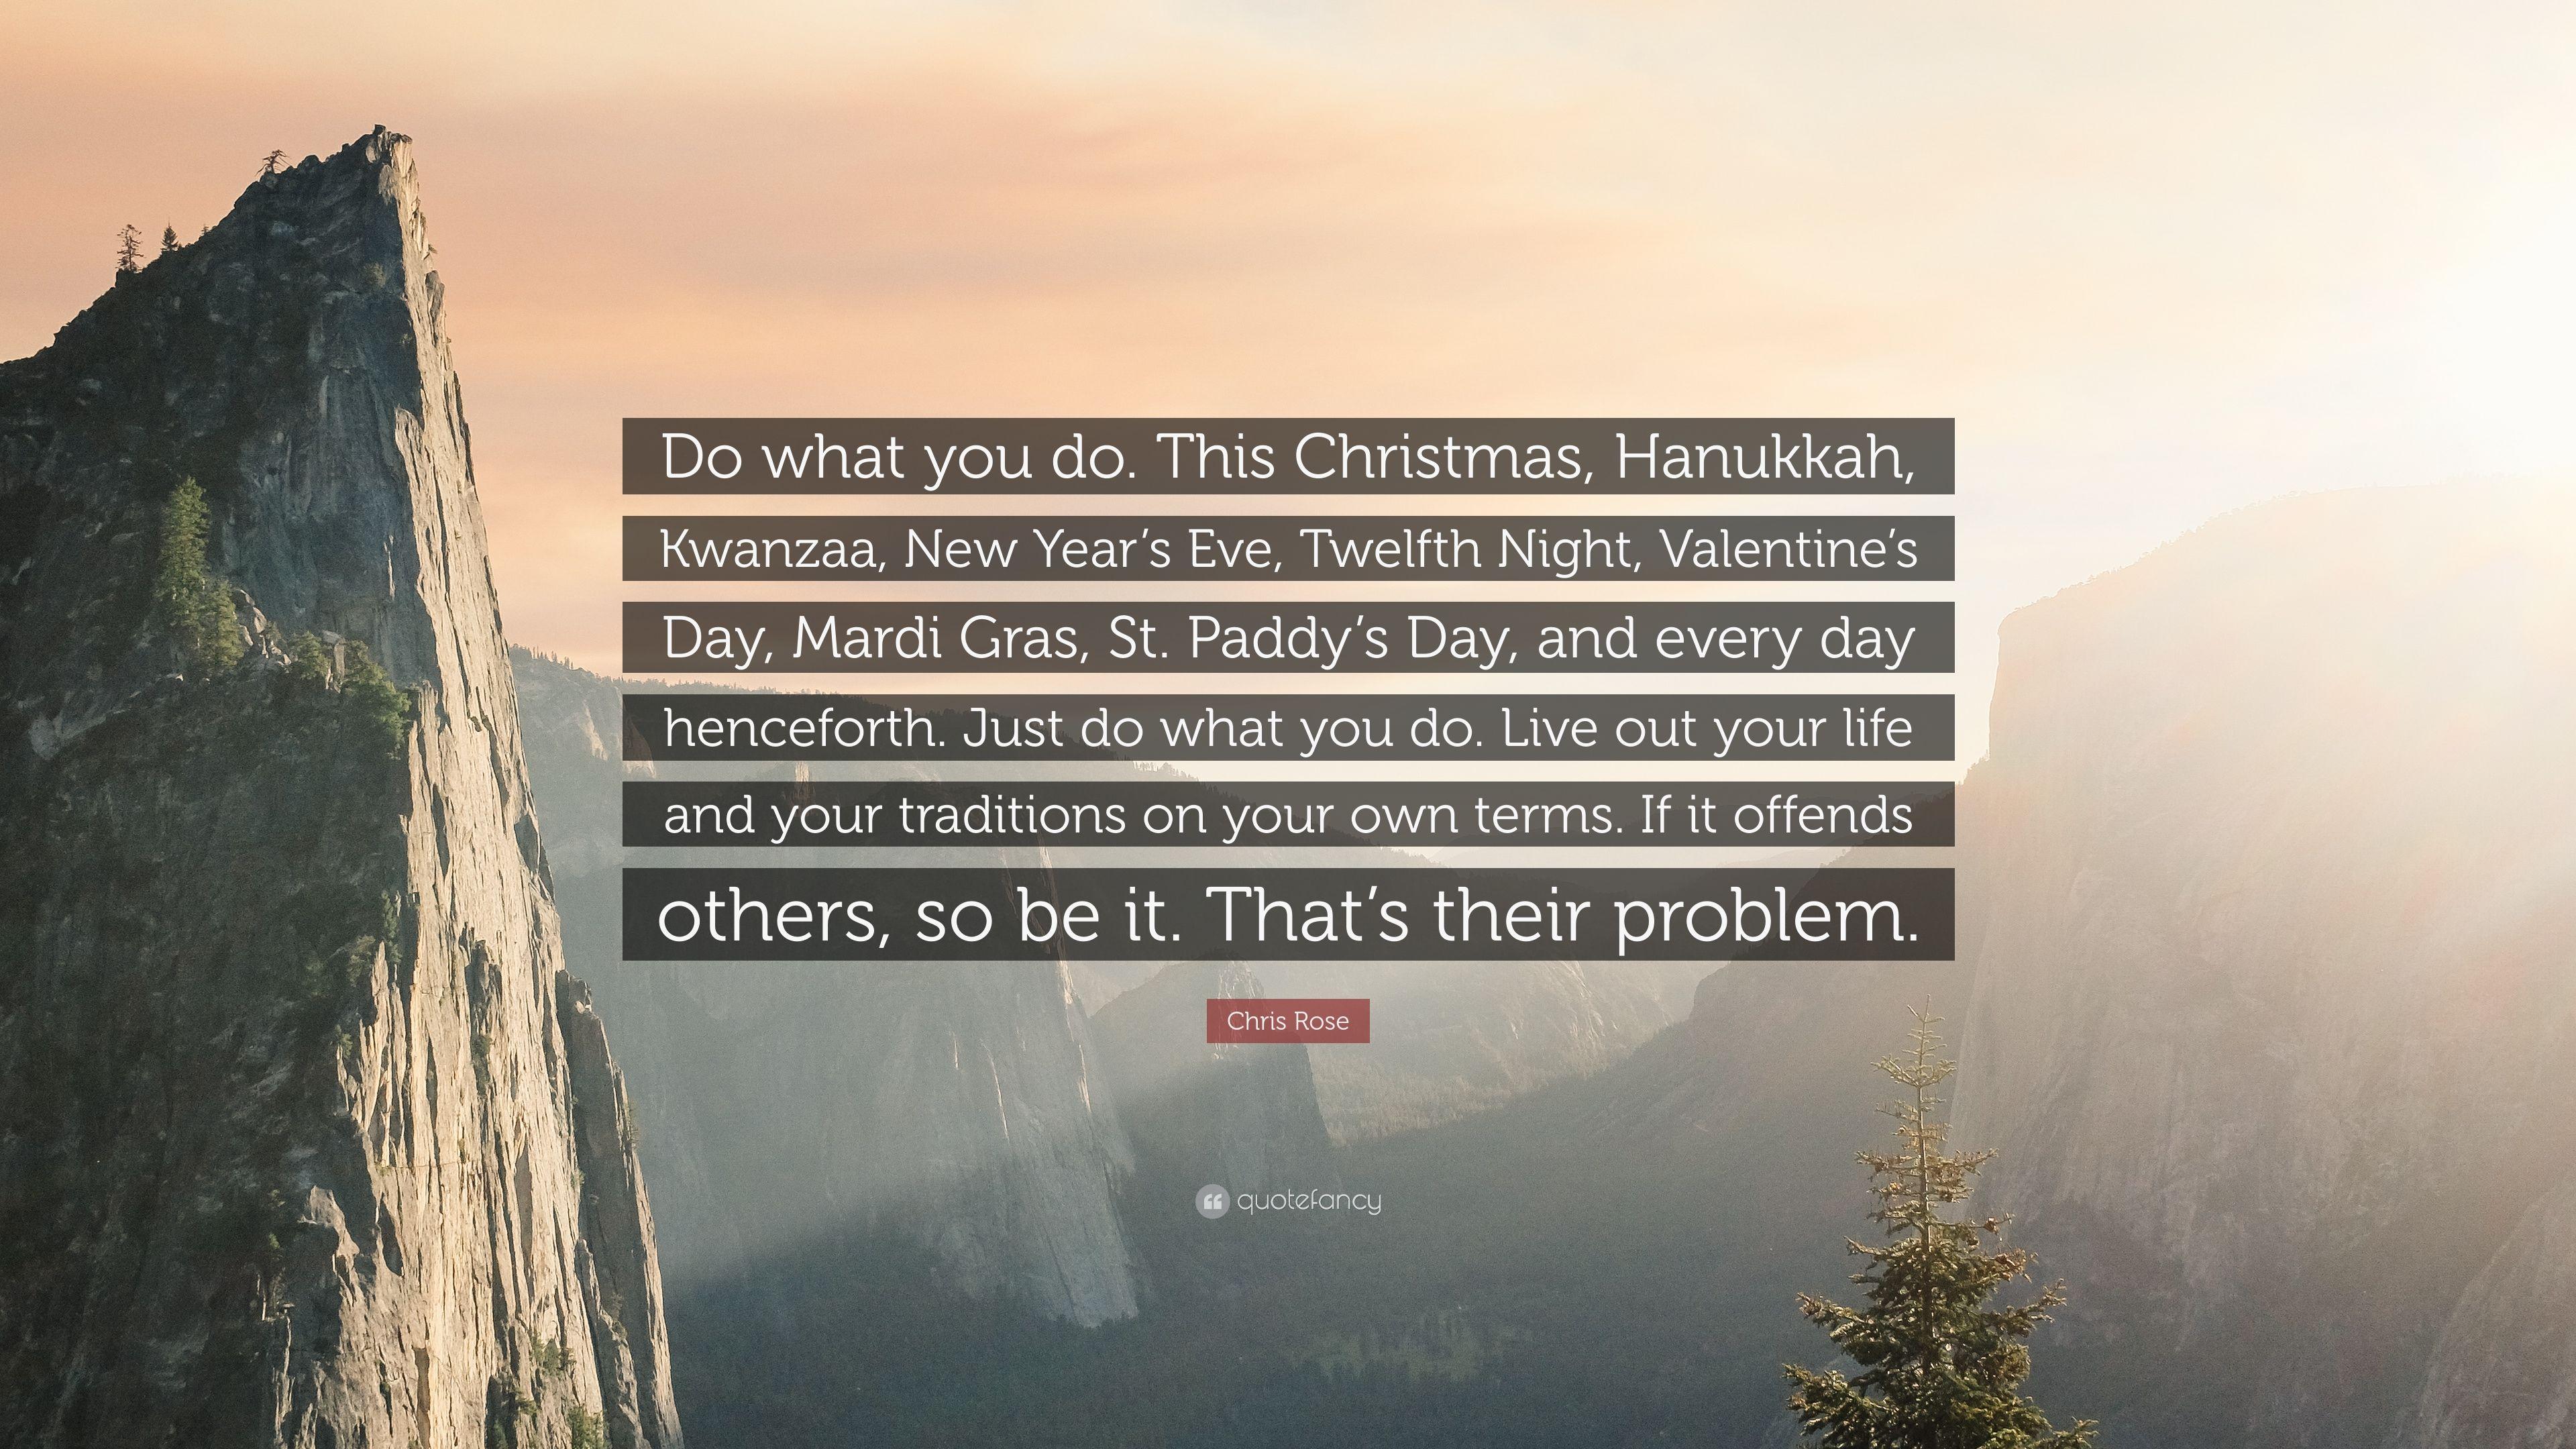 Chris Rose Quote: “Do what you do. This Christmas, Hanukkah, Kwanzaa